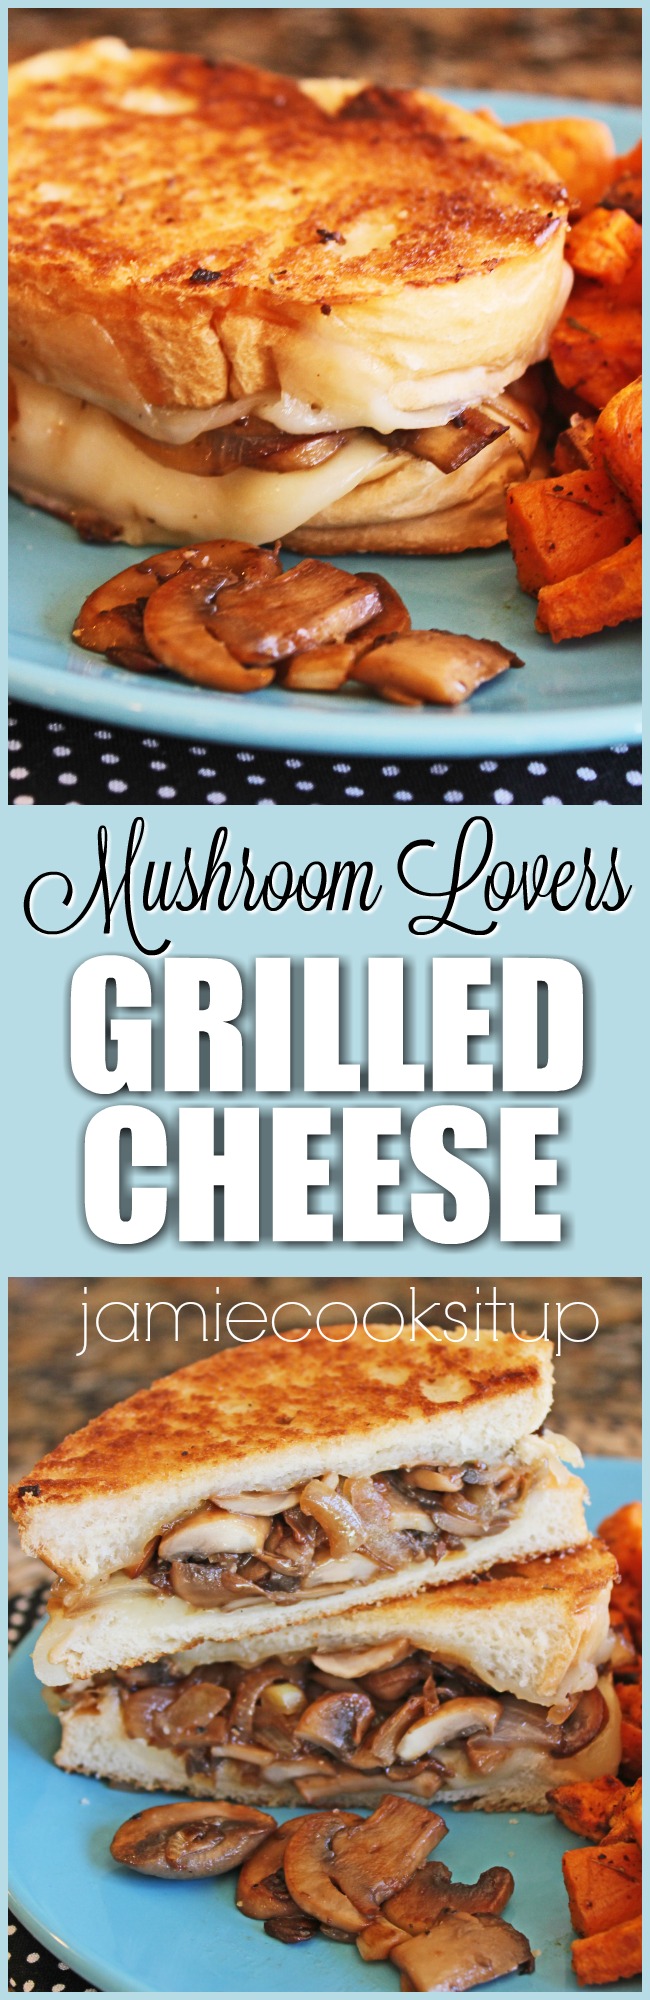 Mushroom Lovers Grilled Cheese Sandwich from Jamie Cooks It Up!